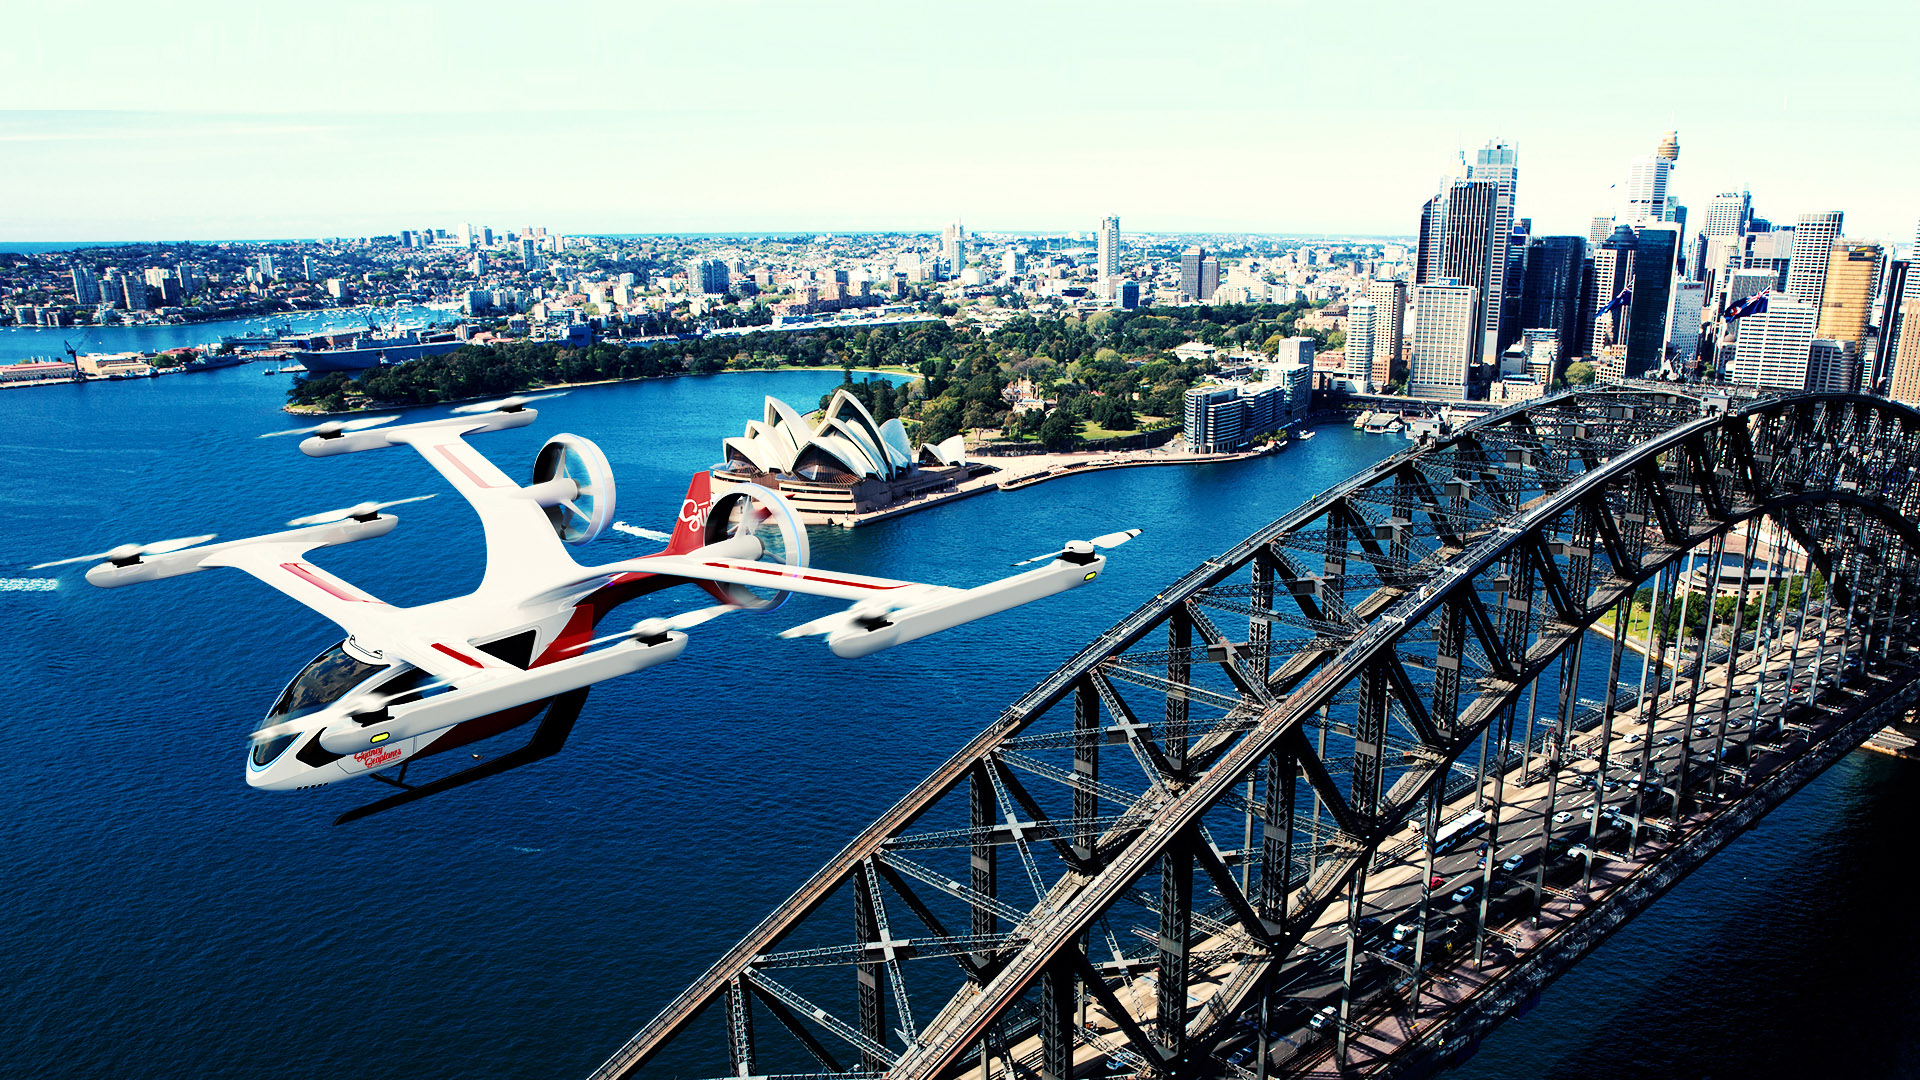 Eve and Sydney Seaplanes announce partnership to bring UAM services to Sydney with an initial order of 50 eVTOLs